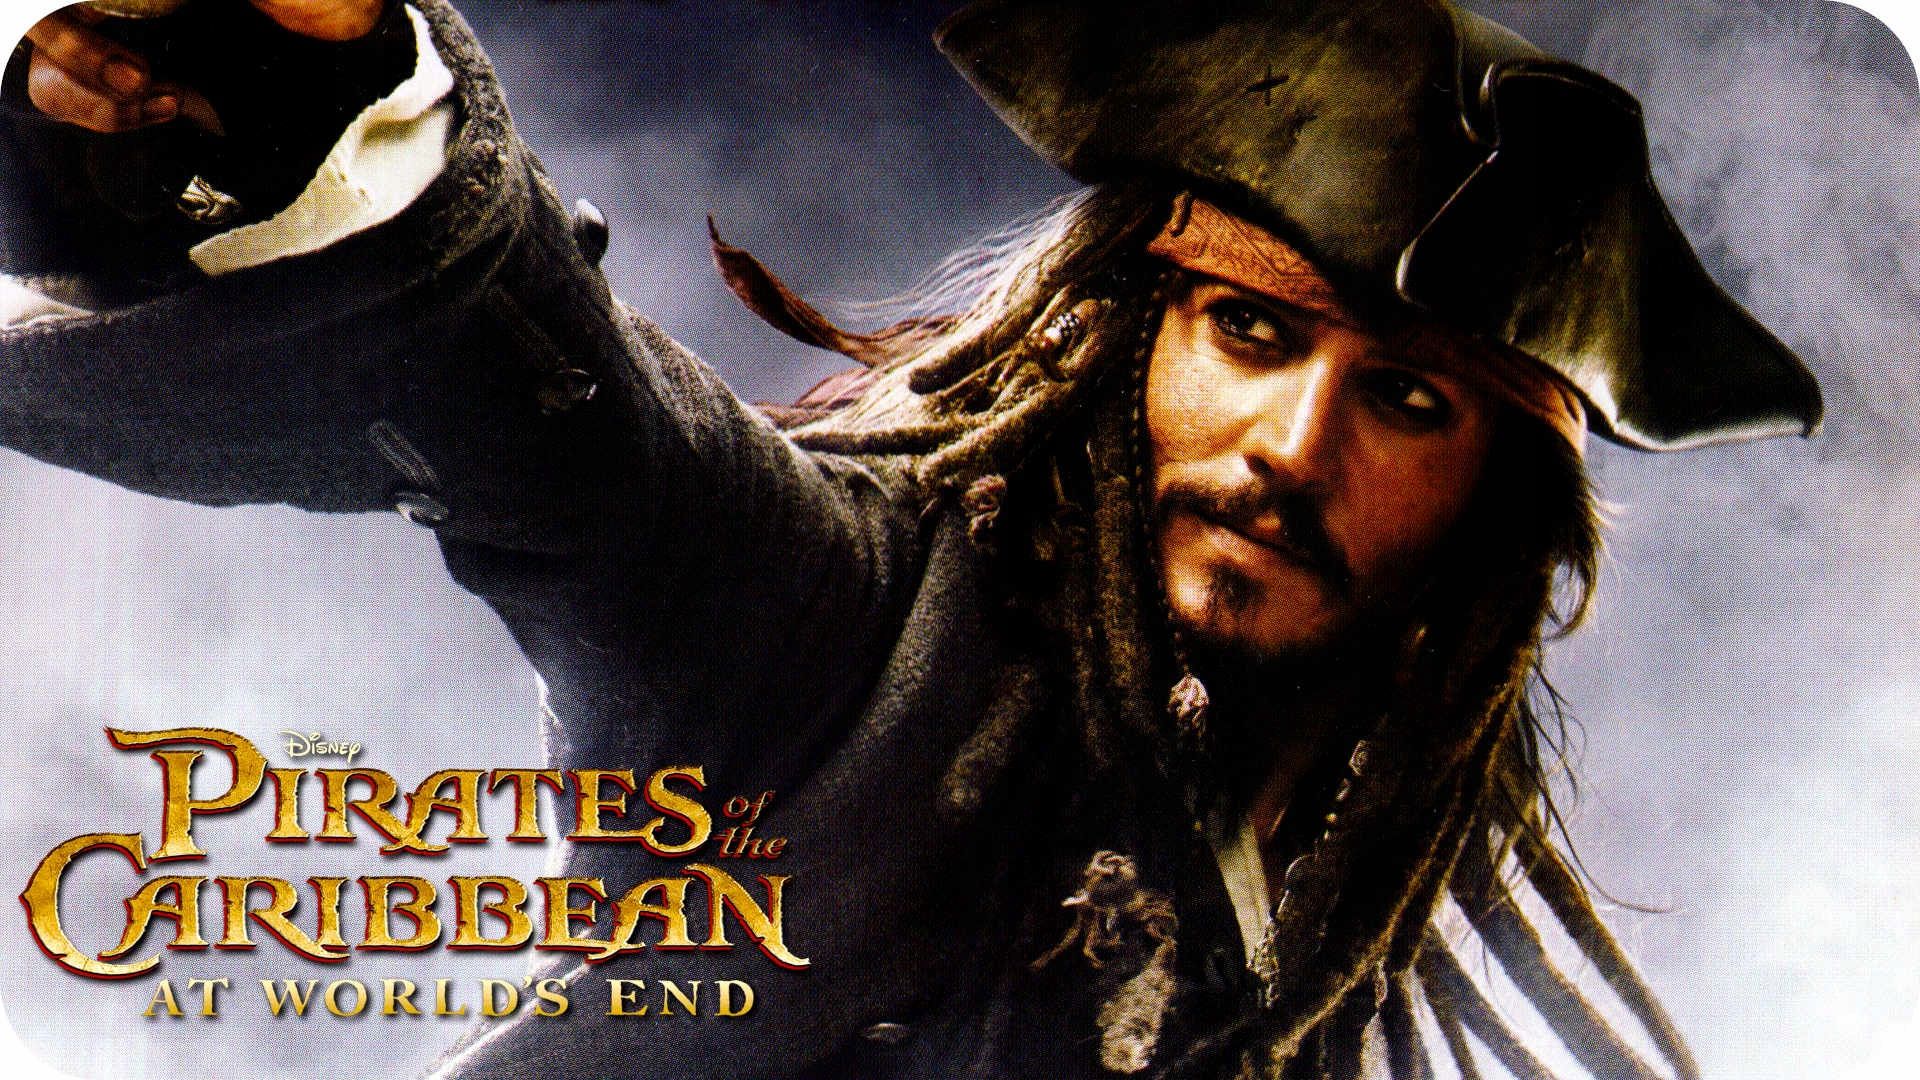 Ps3 Disney Pirates Of The Caribbean At World's End poznajcie Jacka